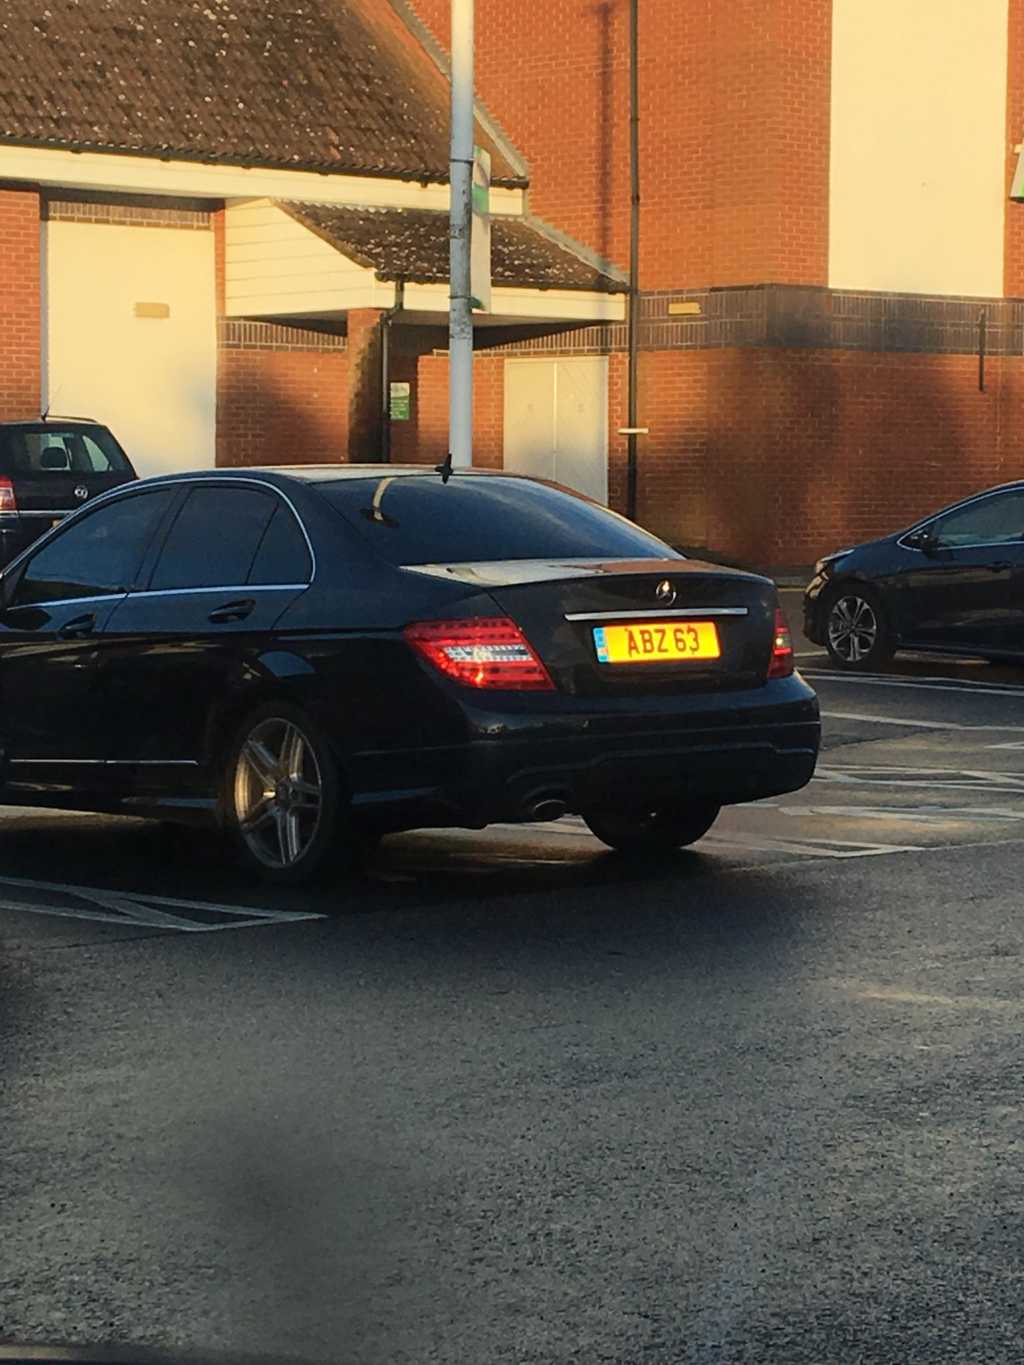 ABZ 63 displaying Inconsiderate Parking